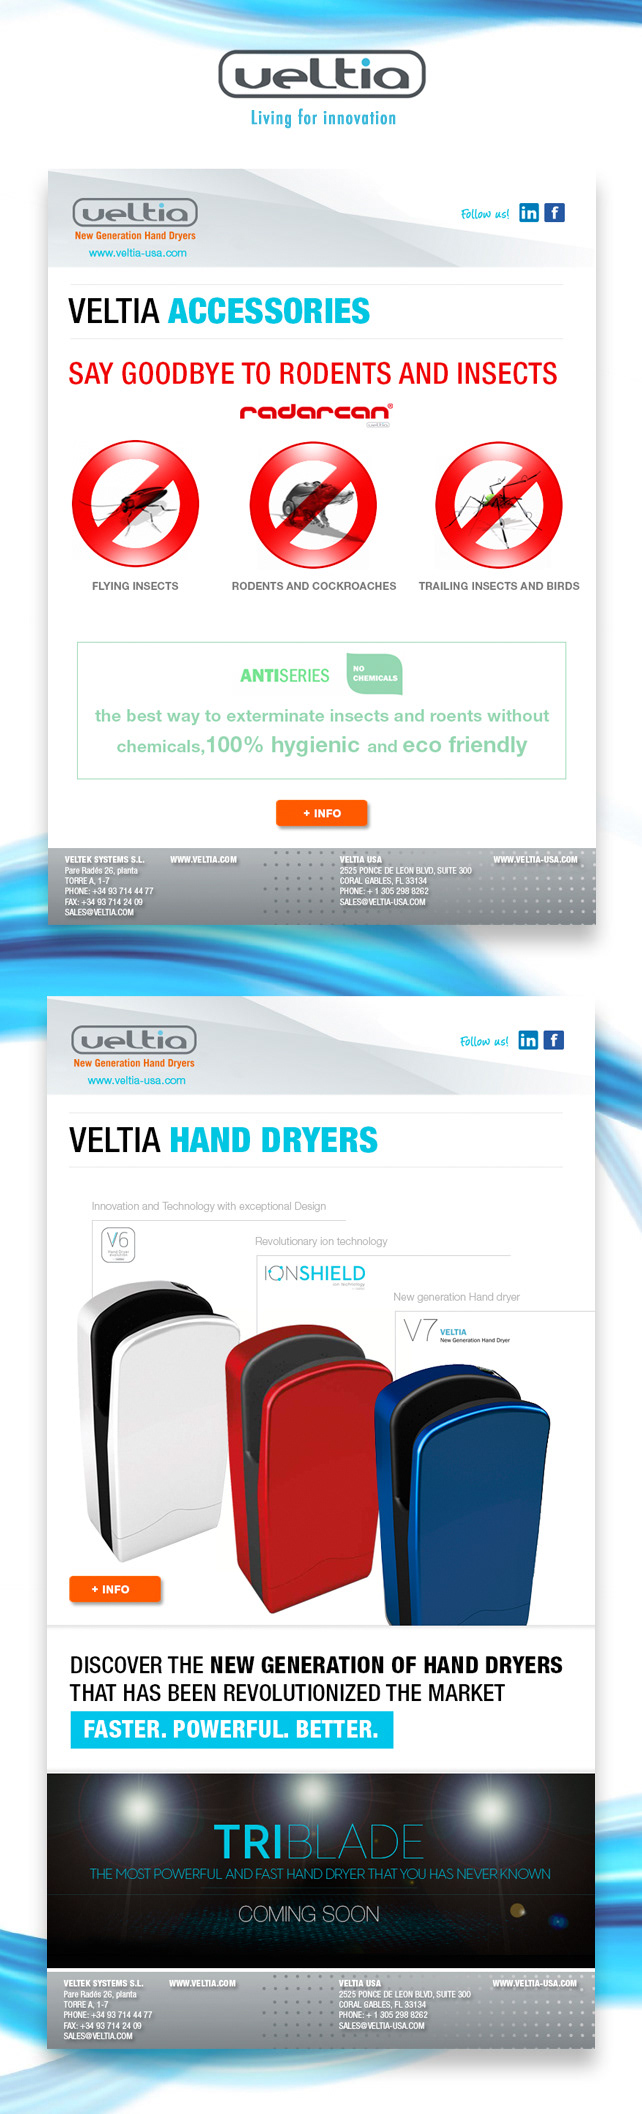 Veltia mailing commercial Email Hand dryers tech Technology dry air corporate corporative brand new generation usa